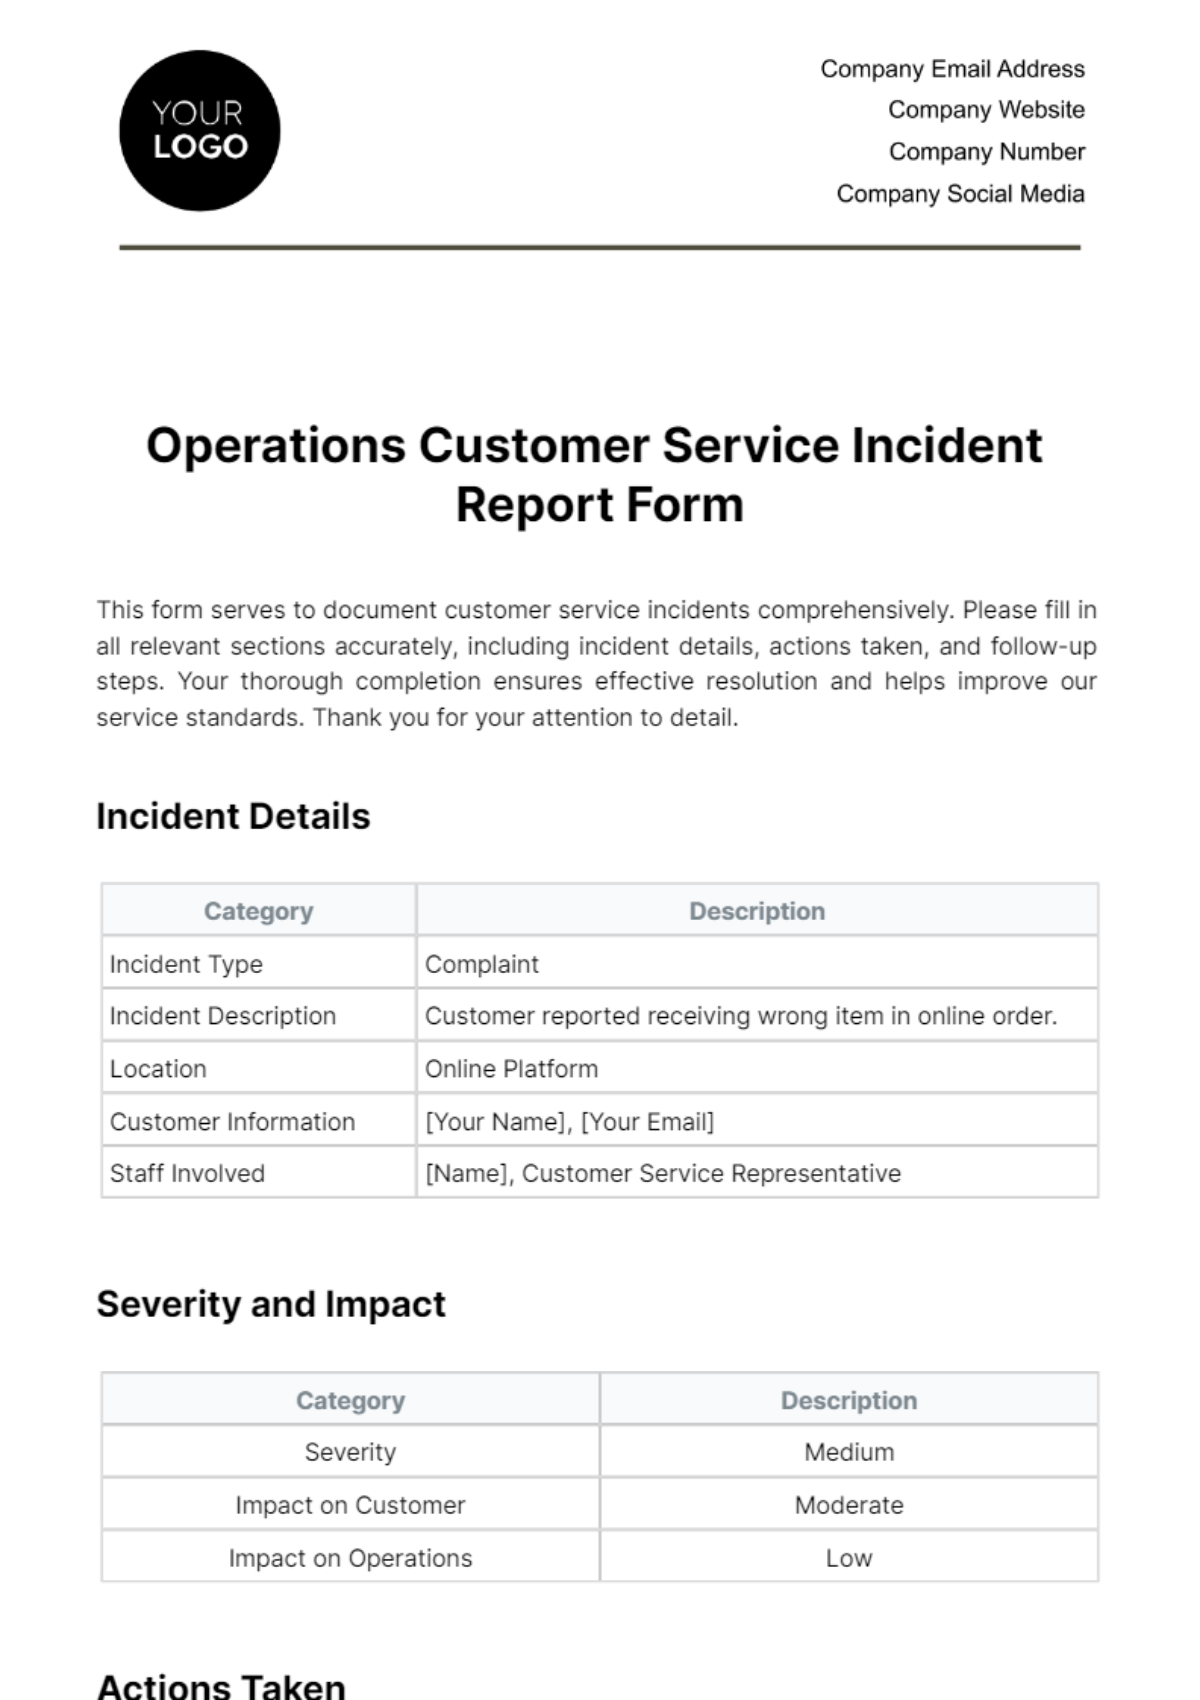 Operations Customer Service Incident Report Form Template